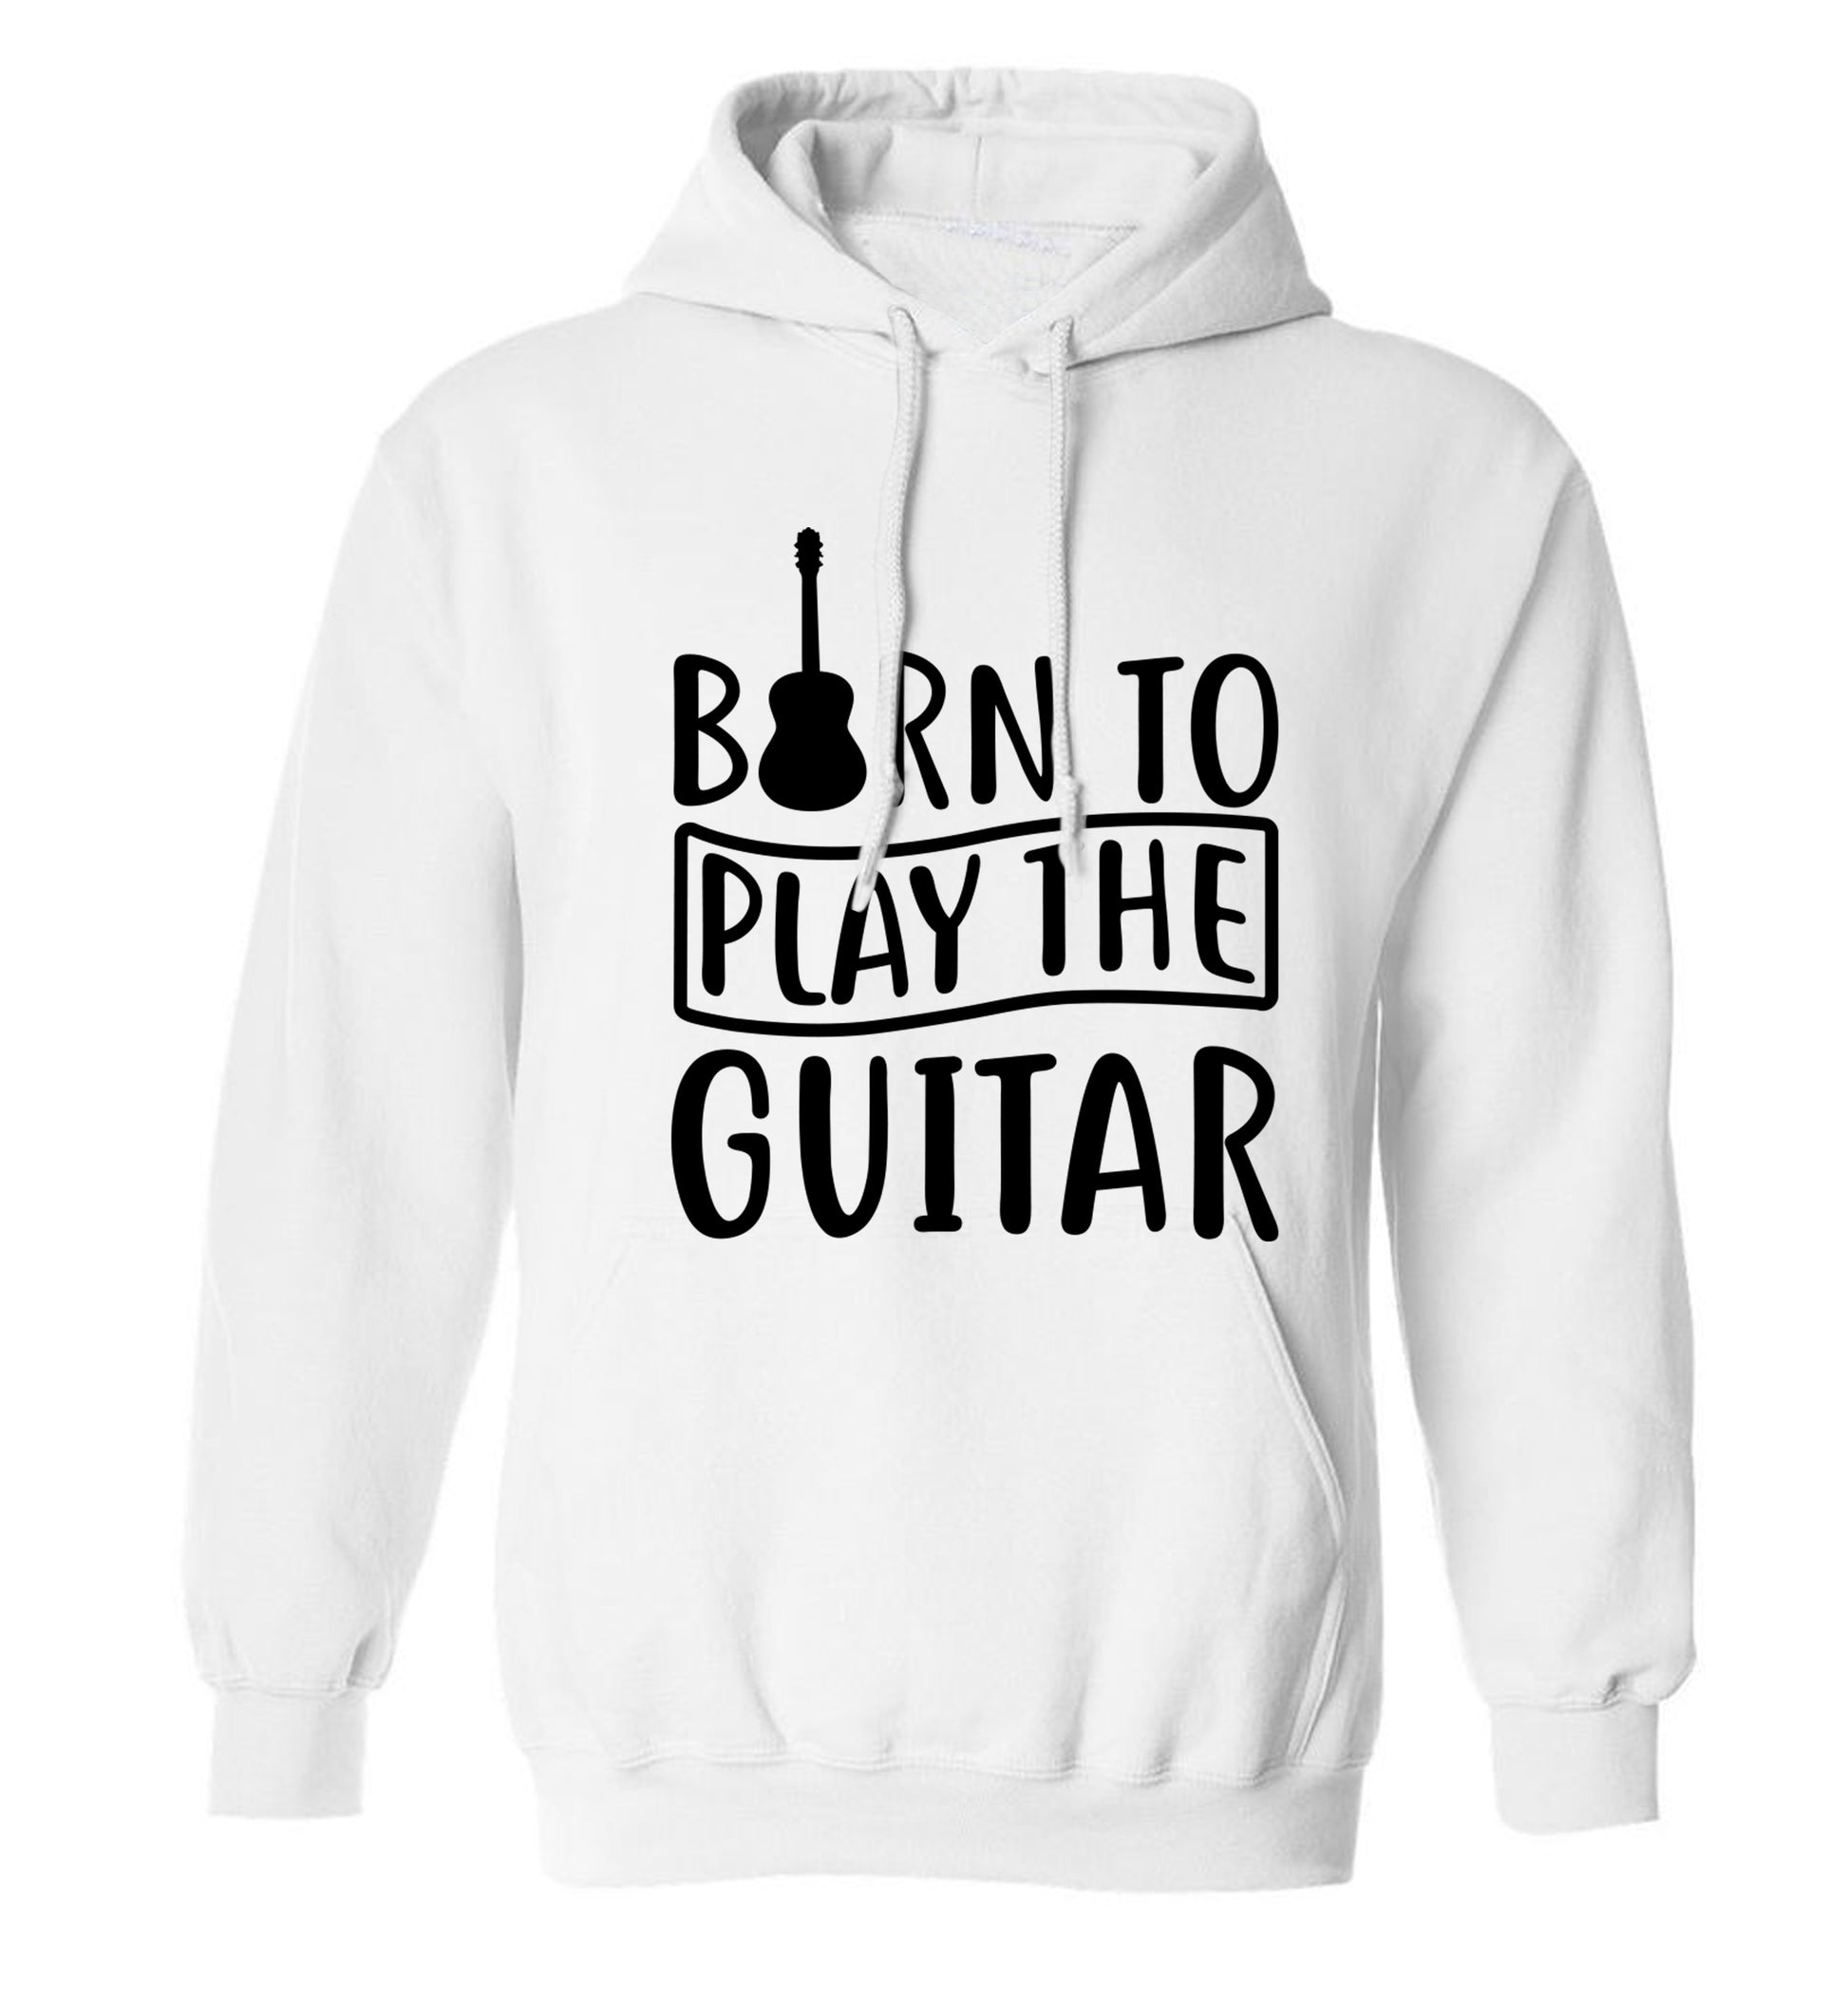 Born to play the guitar adults unisex white hoodie 2XL